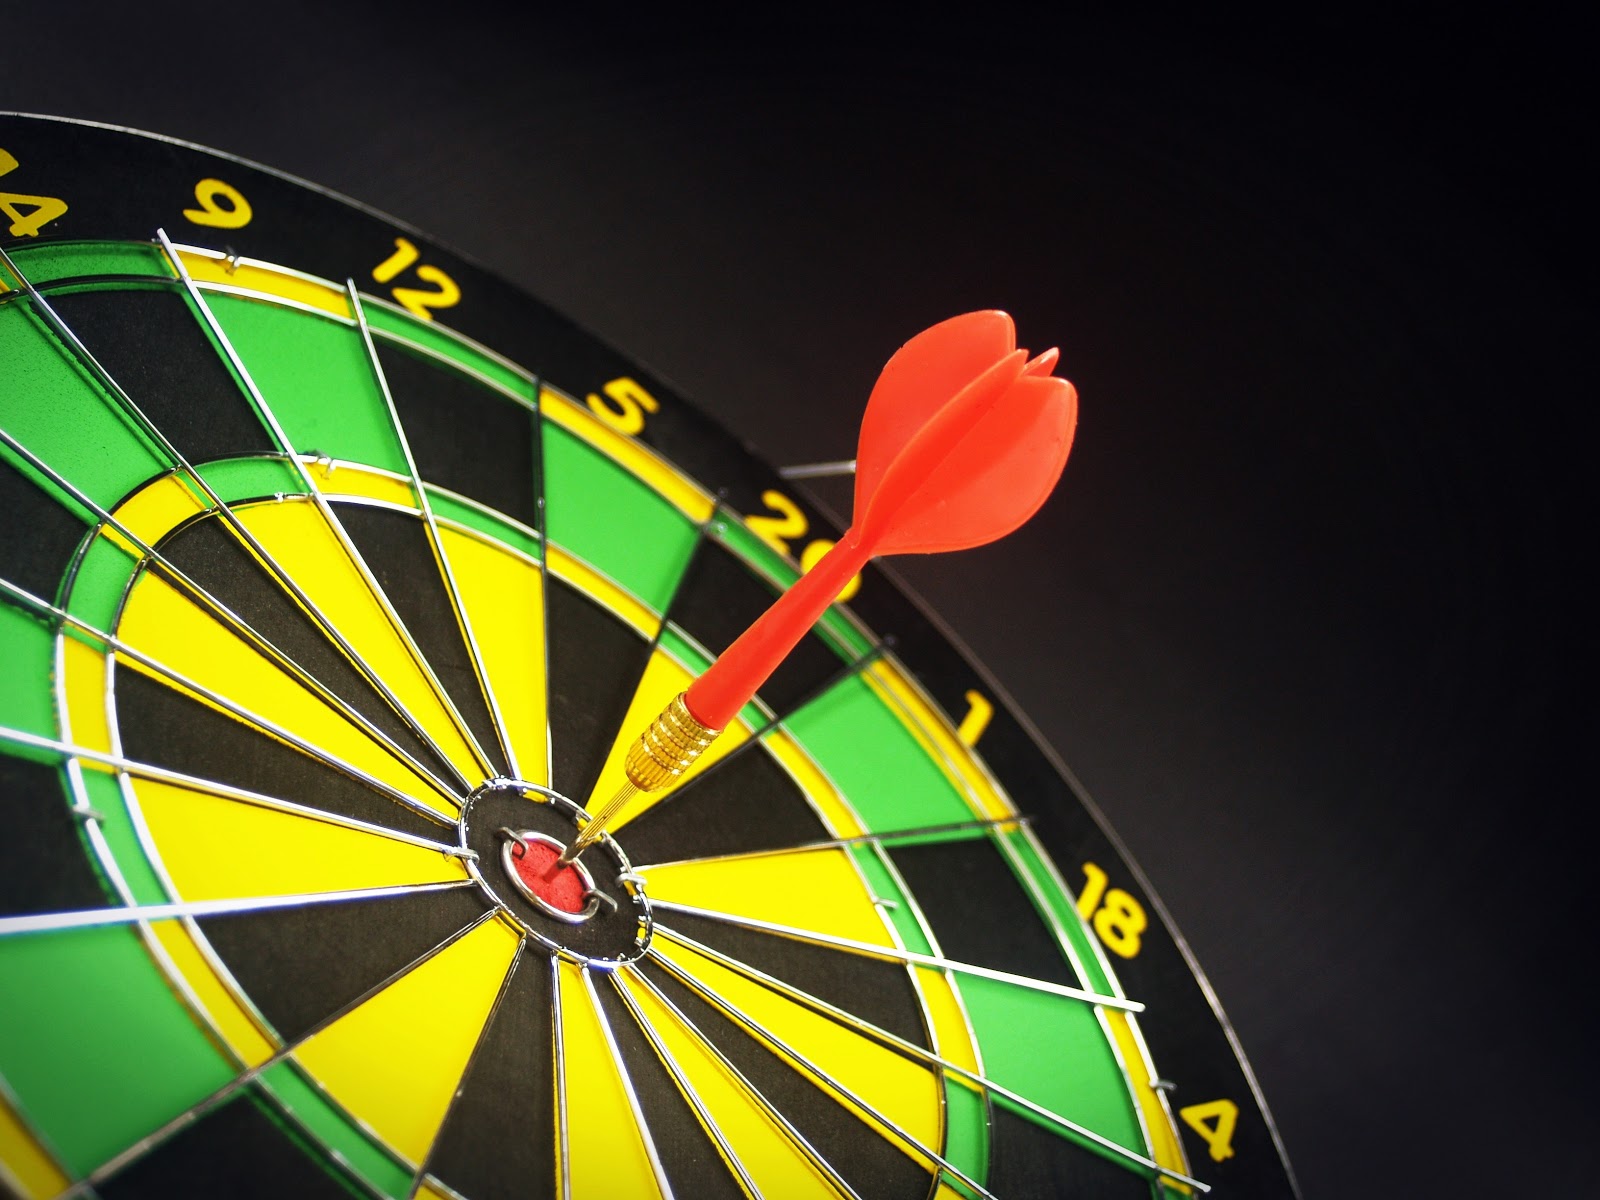 How should you target and sell to each buyer type?